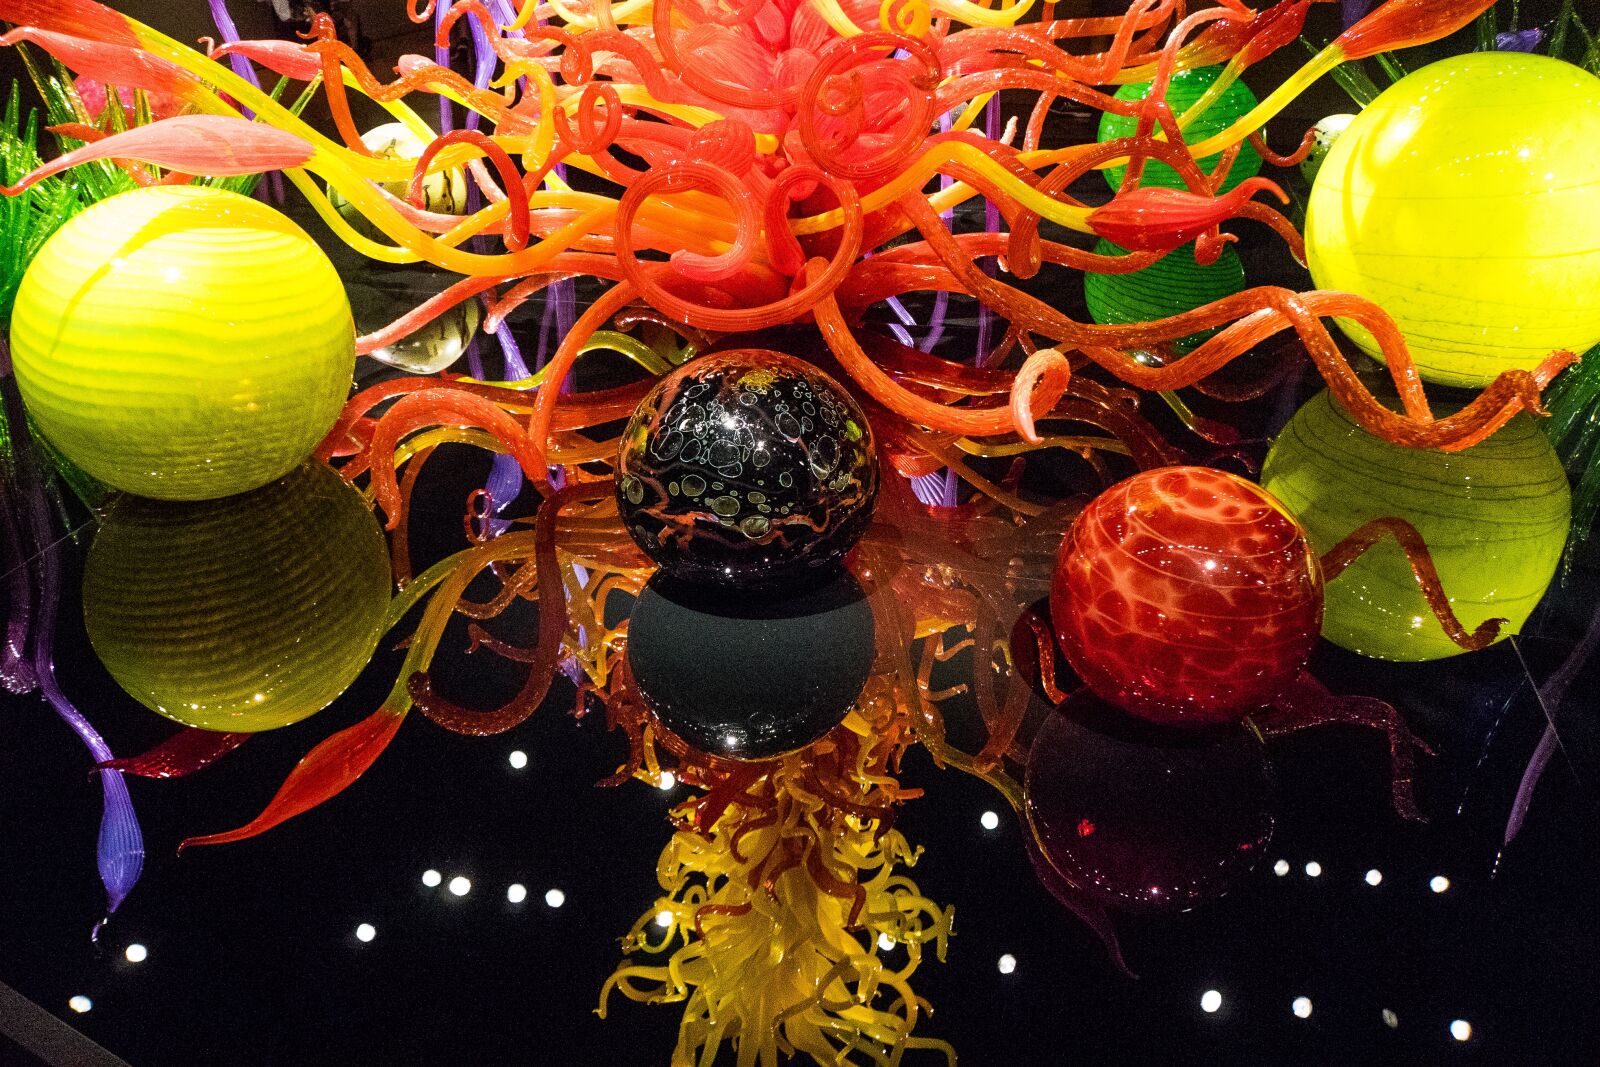 Sony a7 sample photo. Chihuly, glass, tourism photography